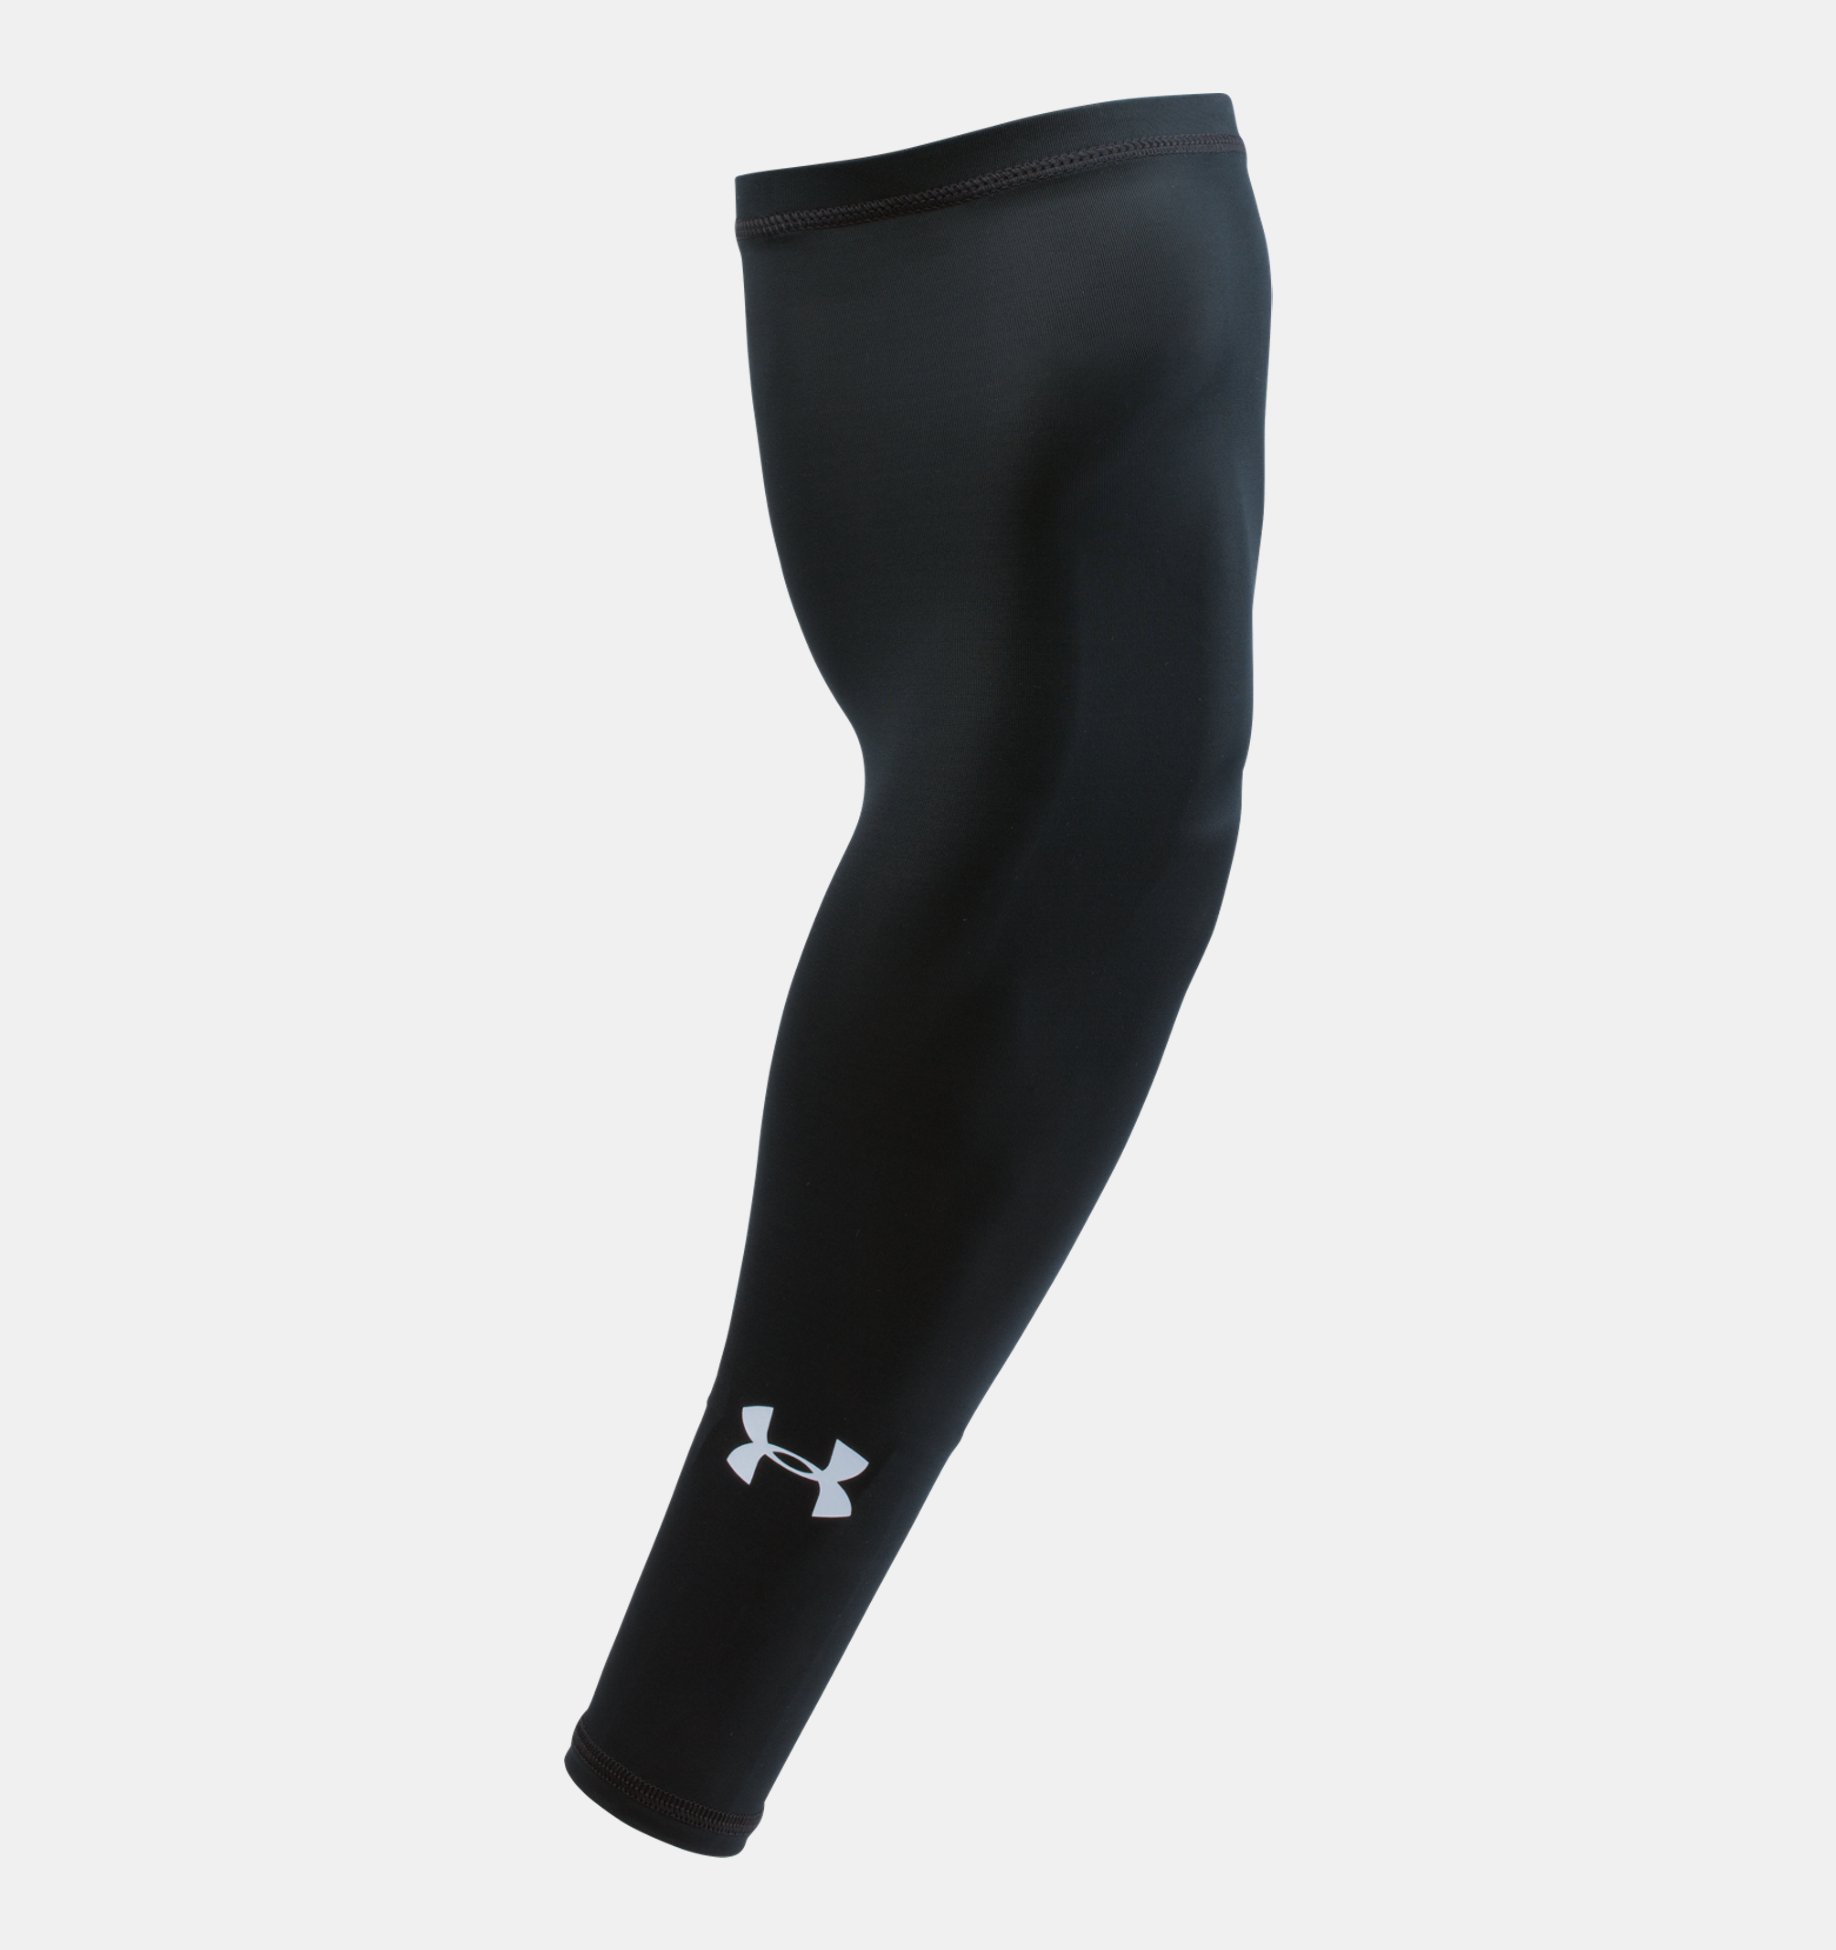 New Under Armour 2 Pack Zonal Compression Arm Sleeves Black/Grey Size L/XL 